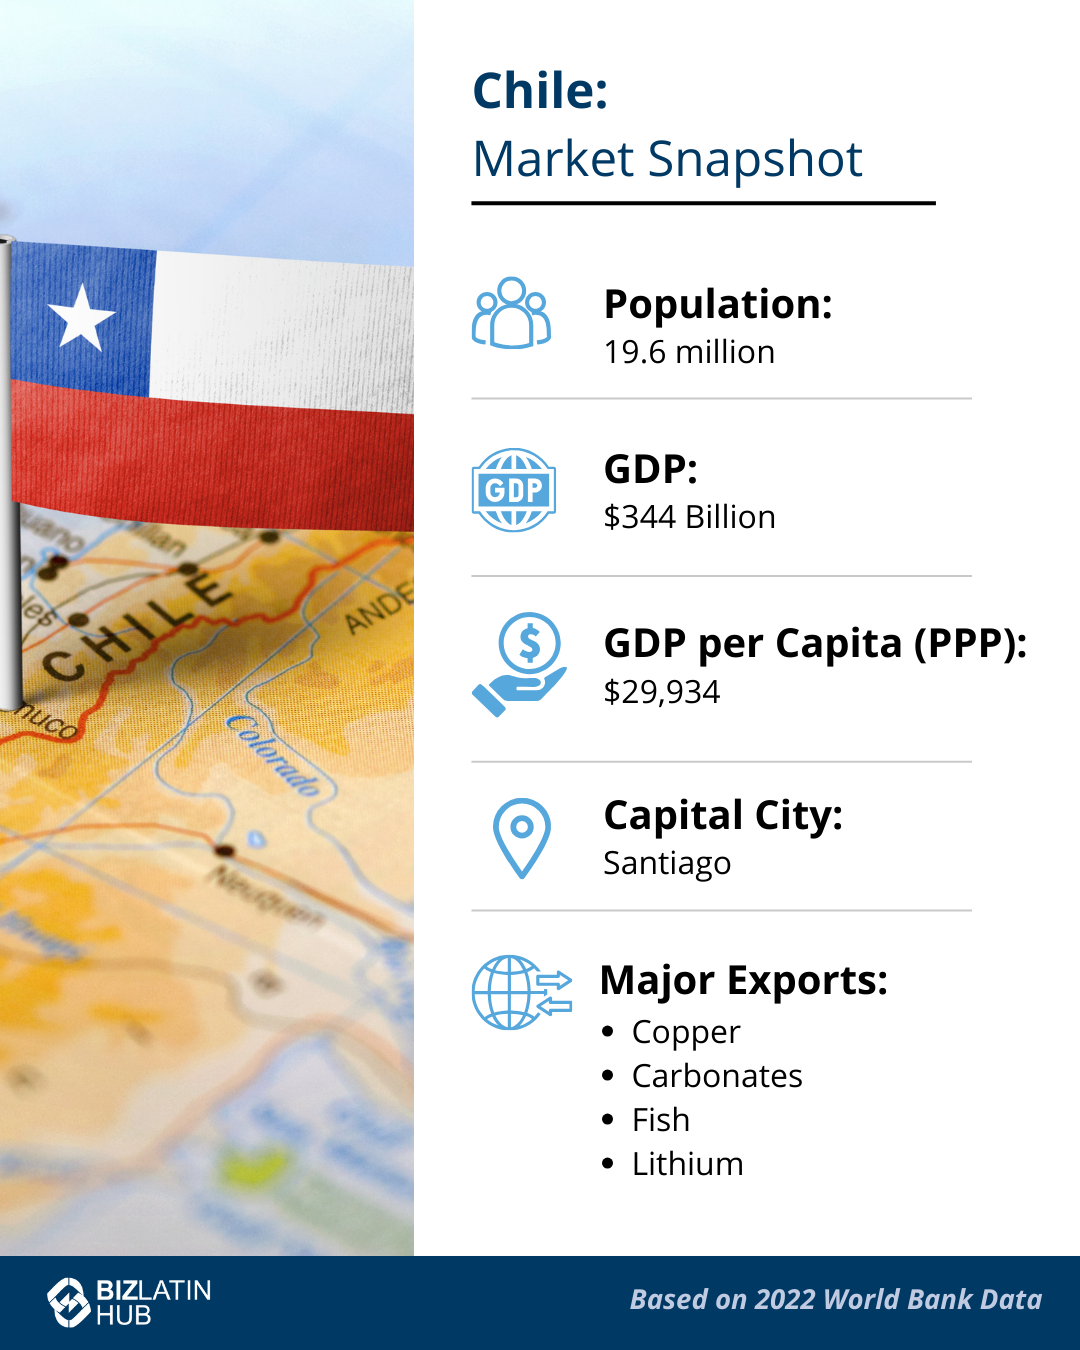 Doing business in Chile: a market snapshot